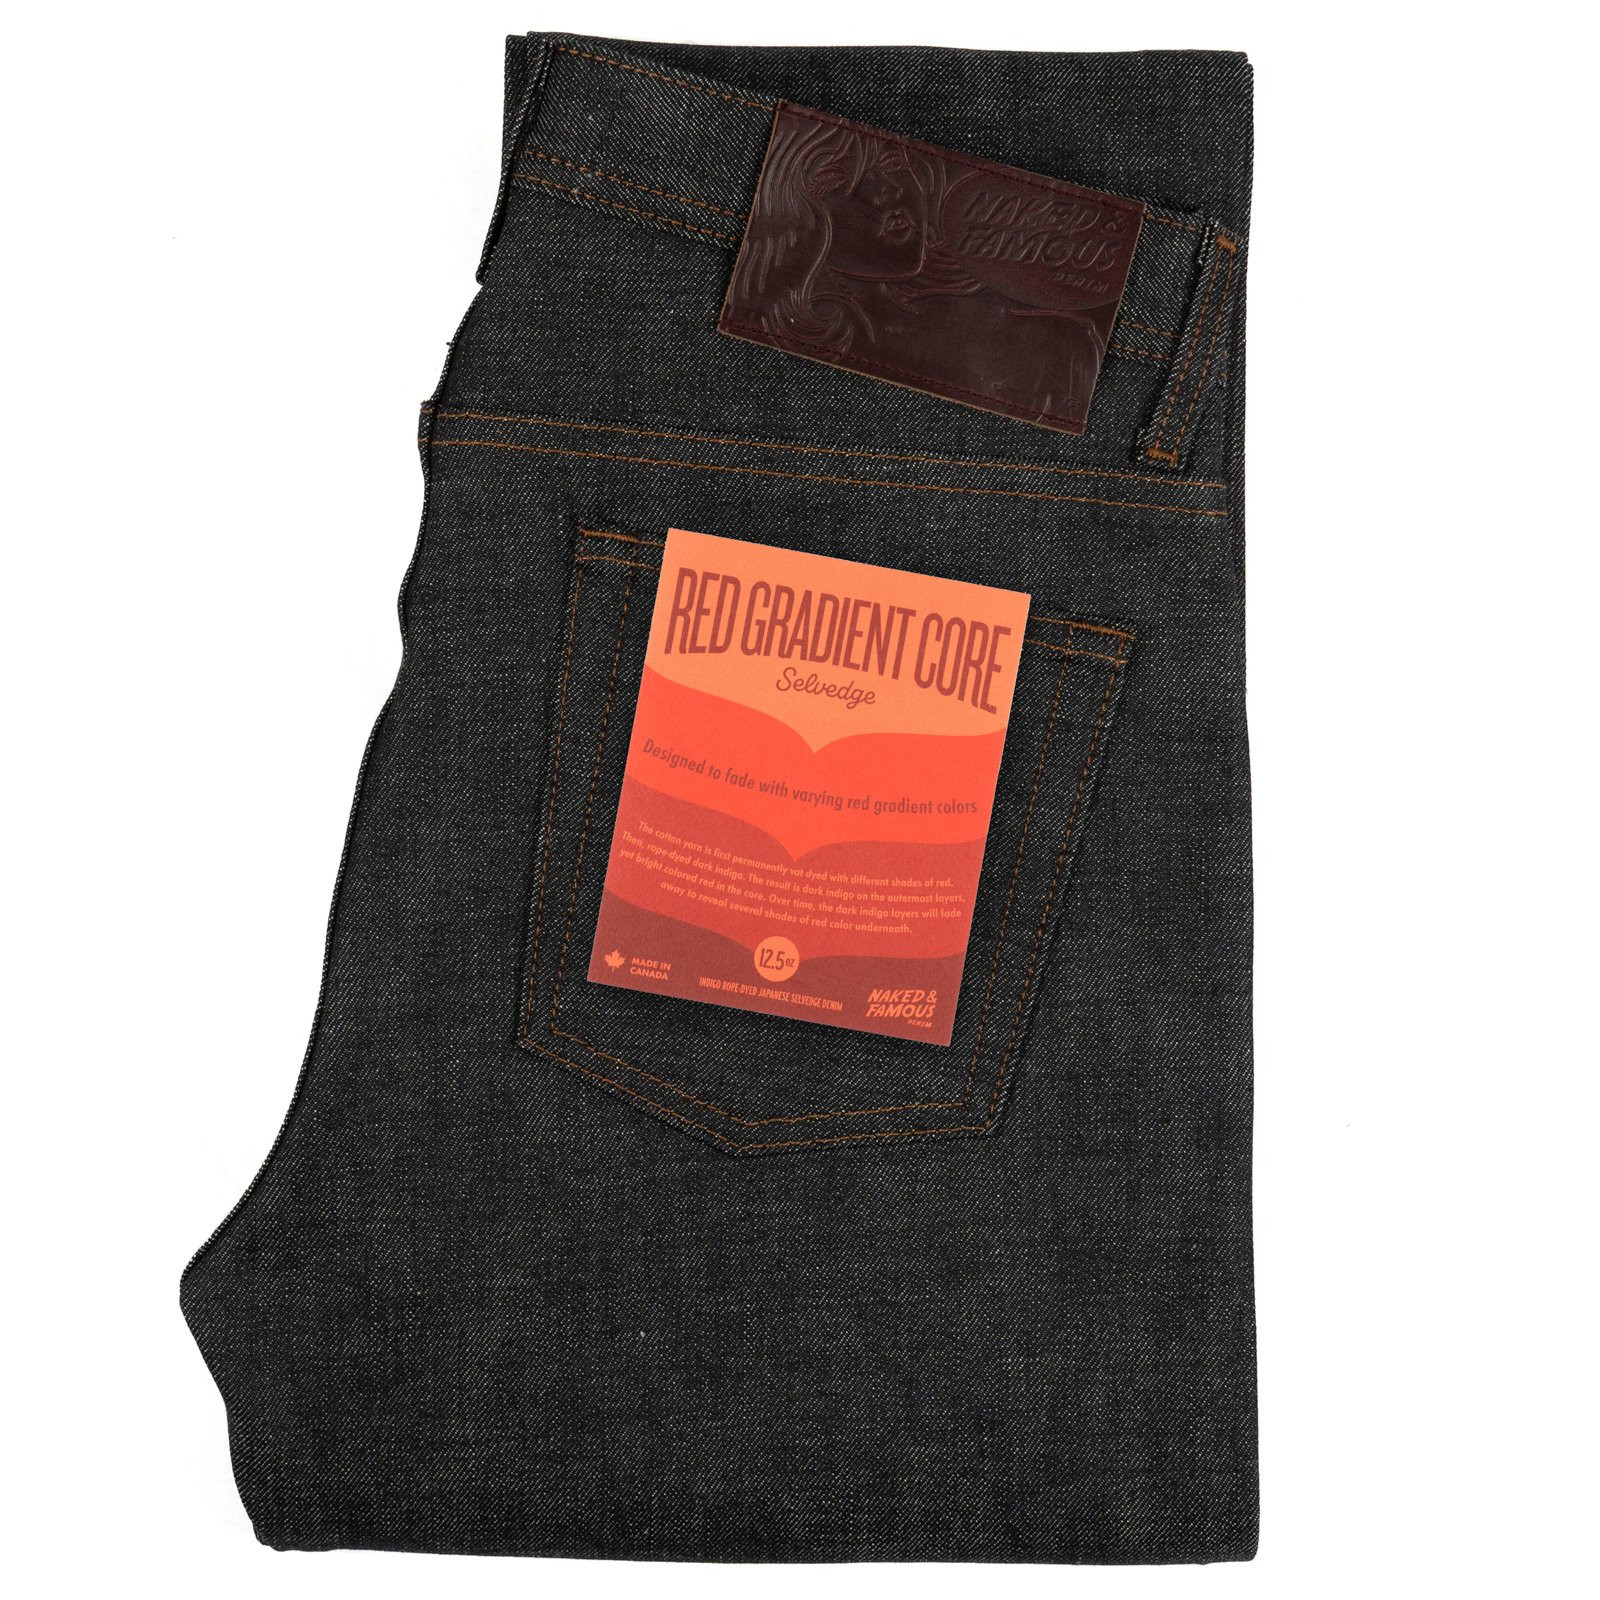  Red Gradient Core Selvedge jeans - folded 